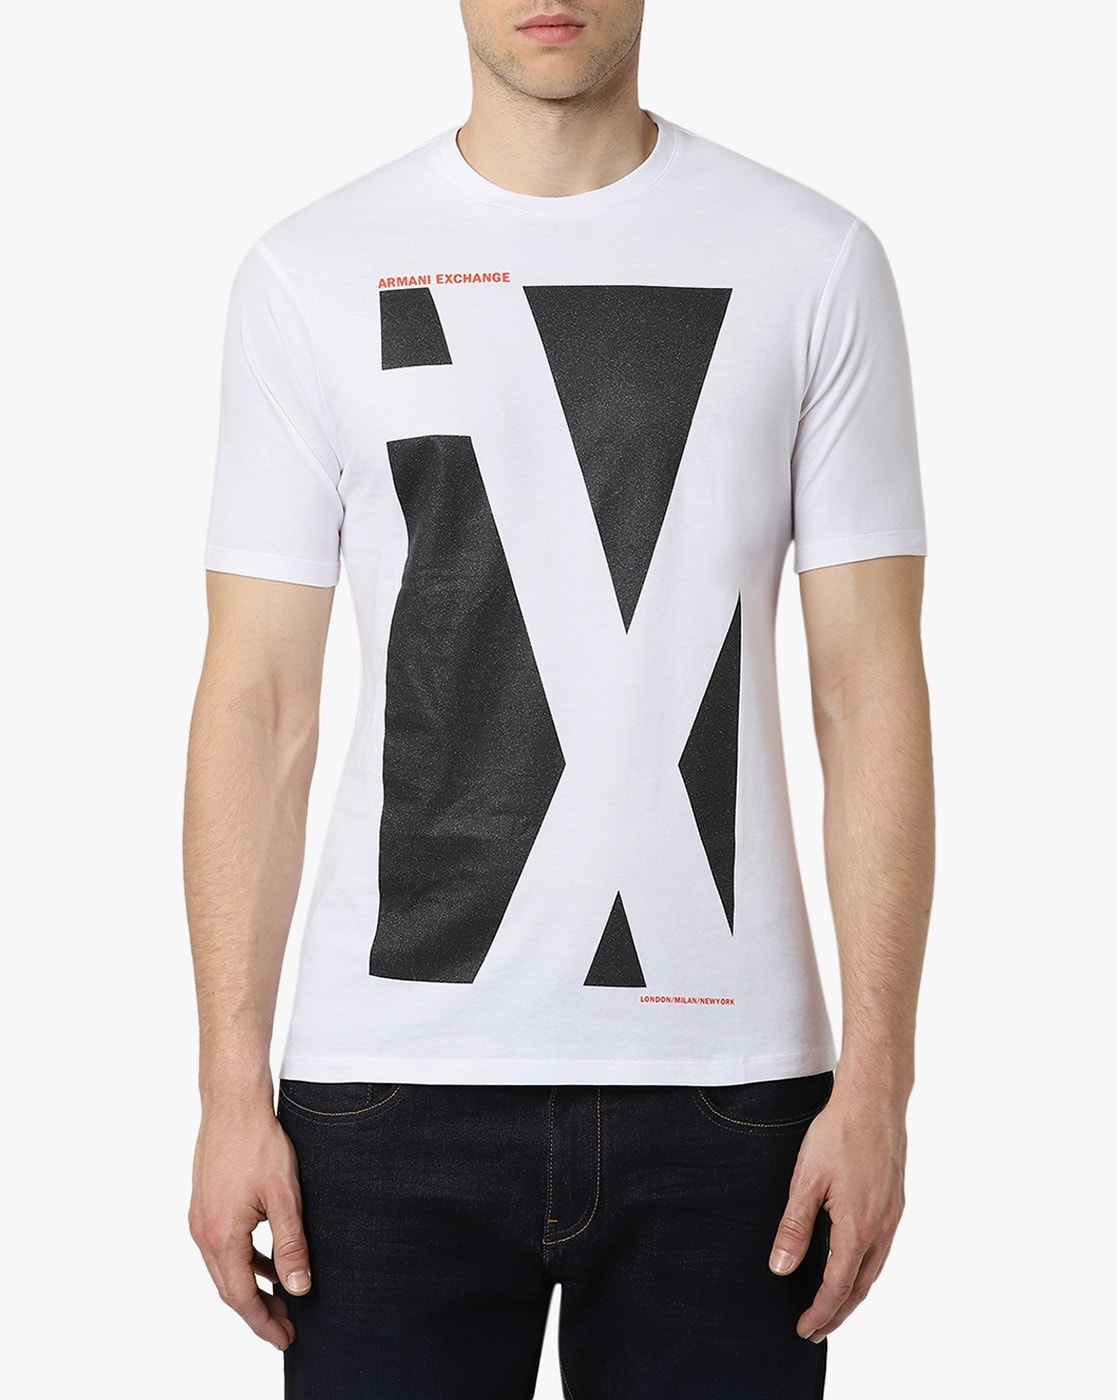 Armani Exchange Tee Shirt Online Store, UP TO 62% OFF | www.aramanatural.es